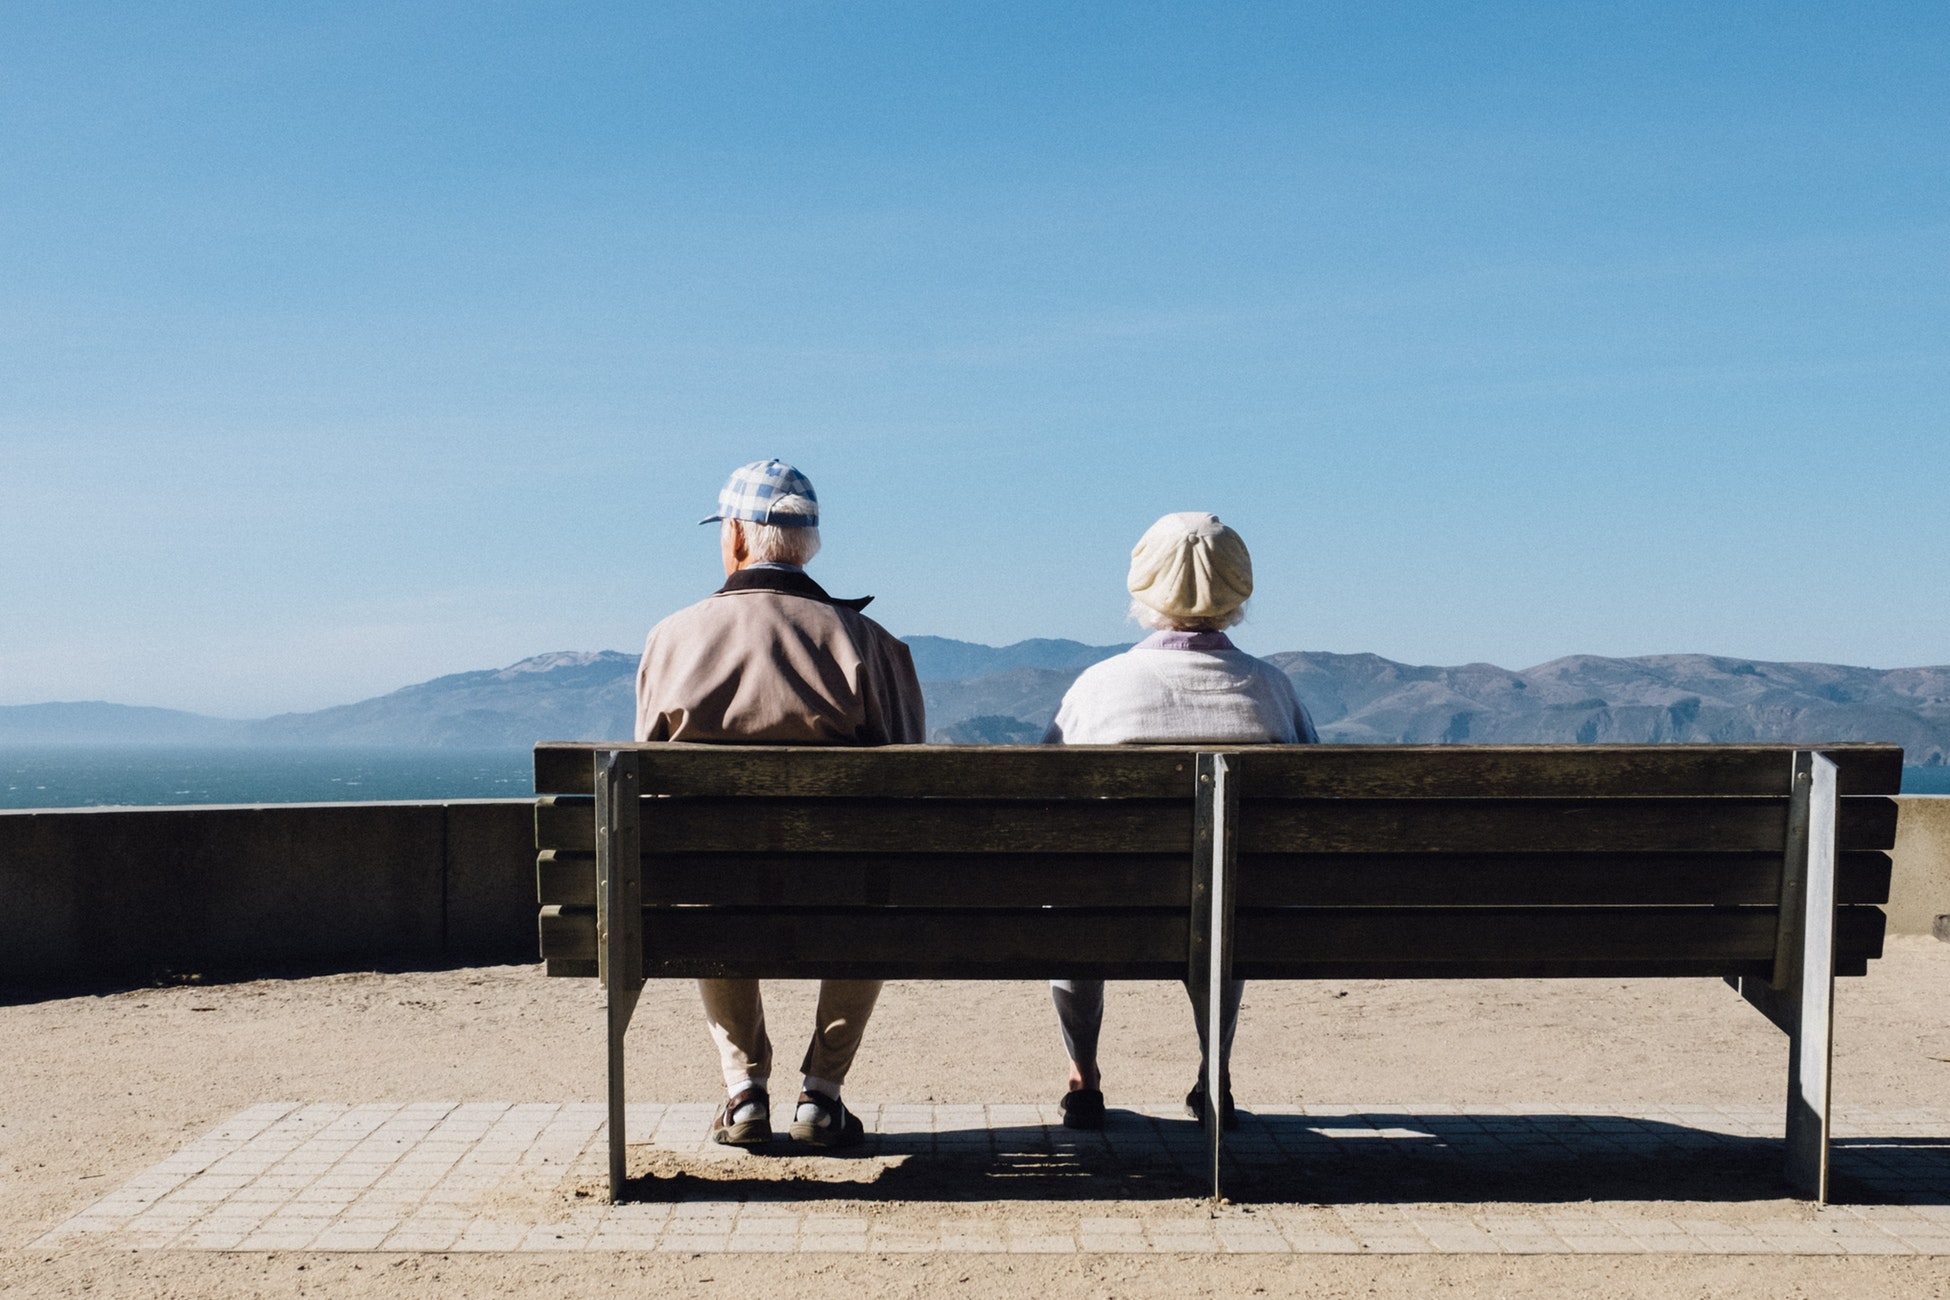 Two older people sitting on a bench with a blue sky above.